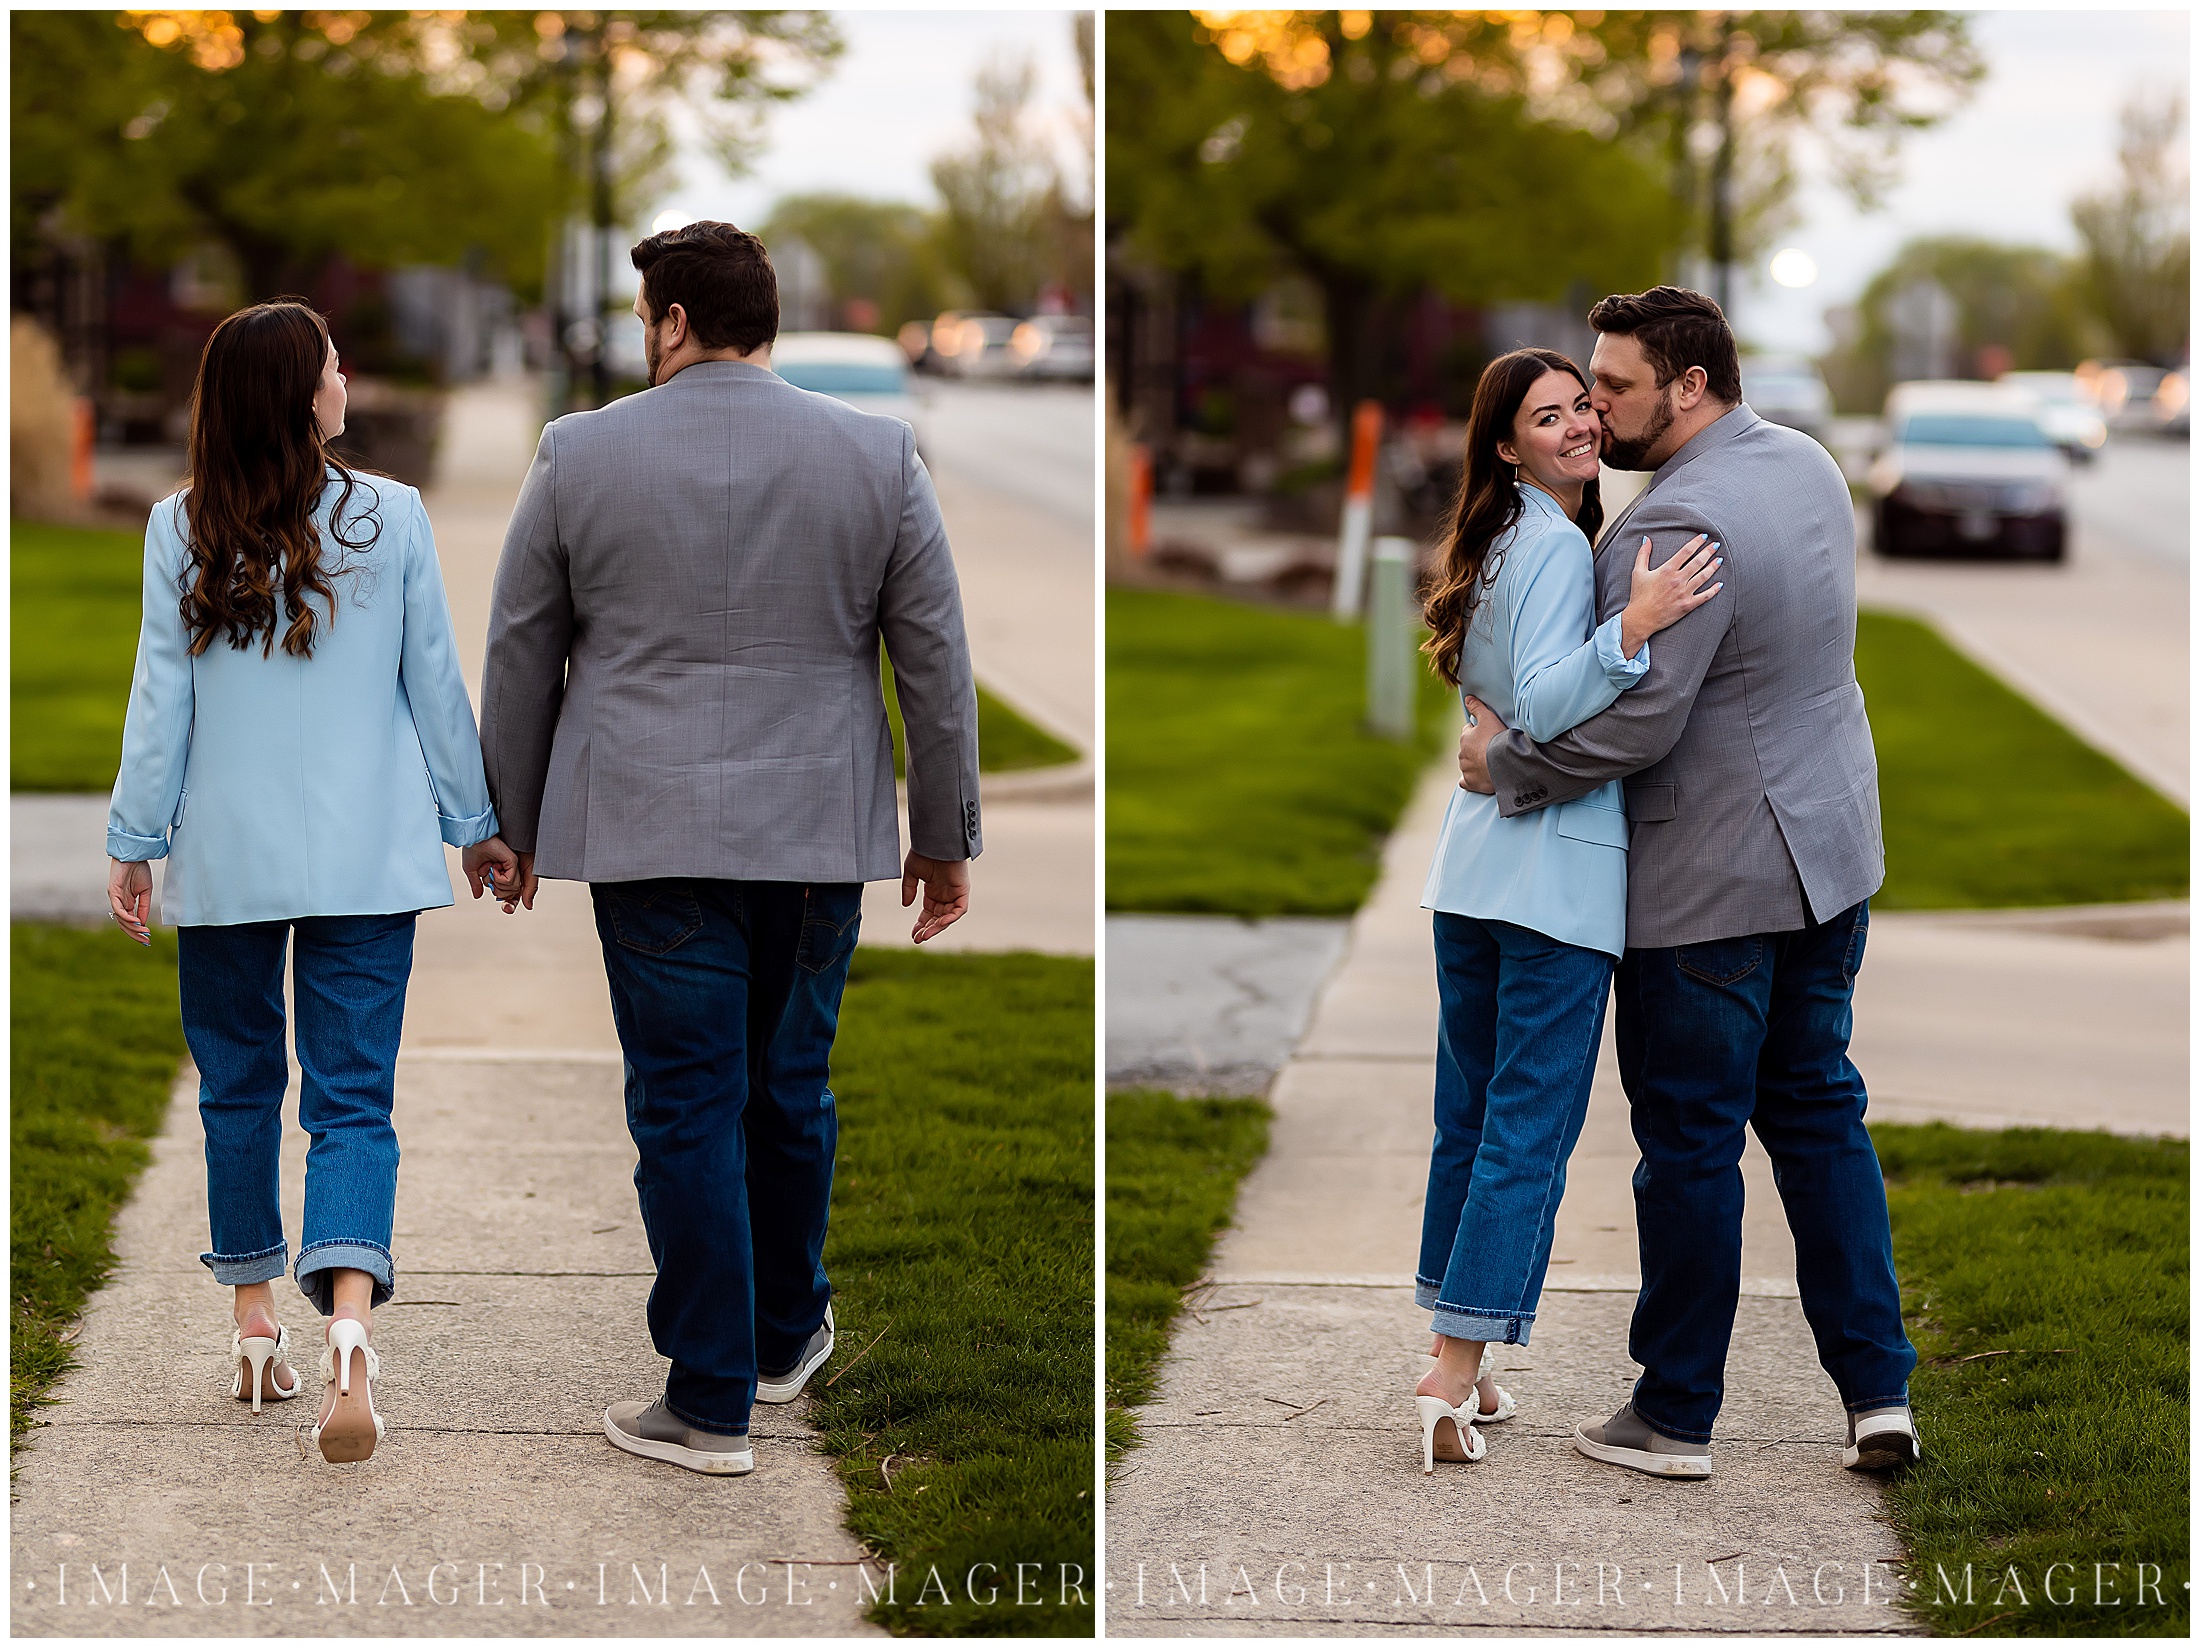 Easygoing Engagement Session at Riverbend Forest Preserve, Mahomet, Illinois